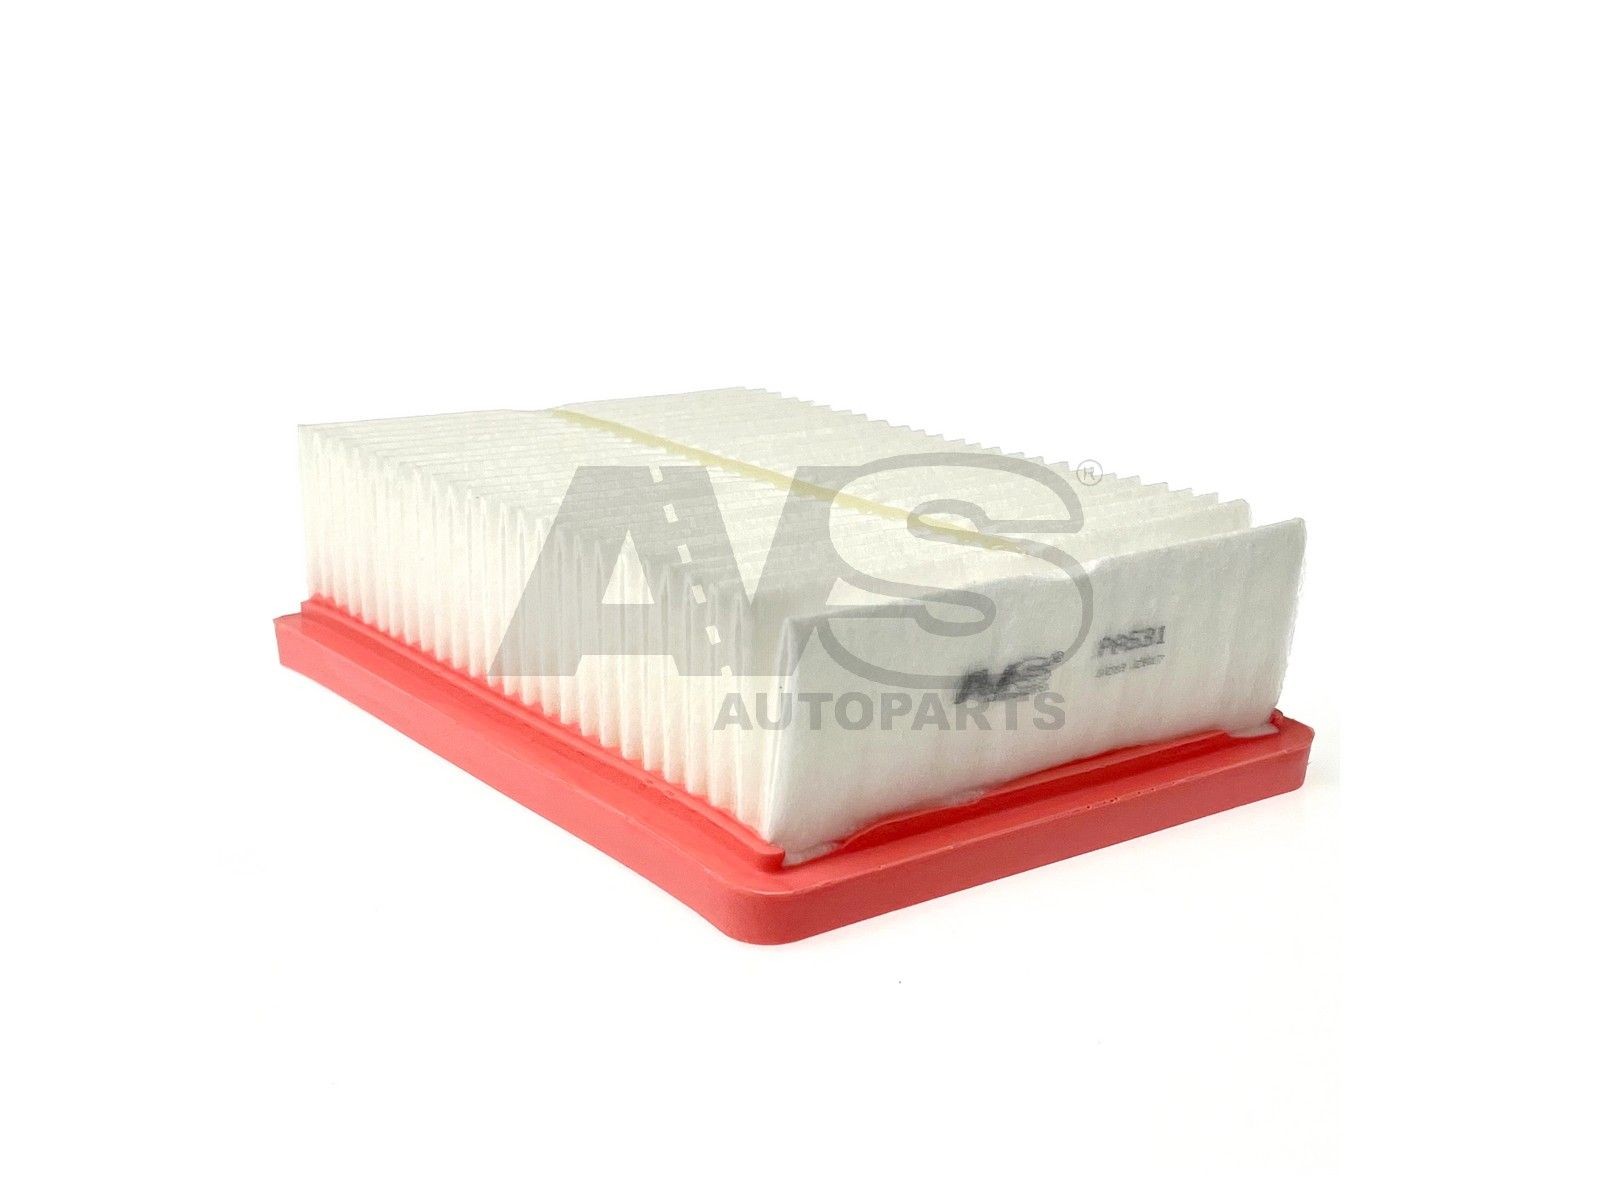 Engine air filters AVS AUTOPARTS 55mm, 140mm, 205mm, Filter Insert - PA531